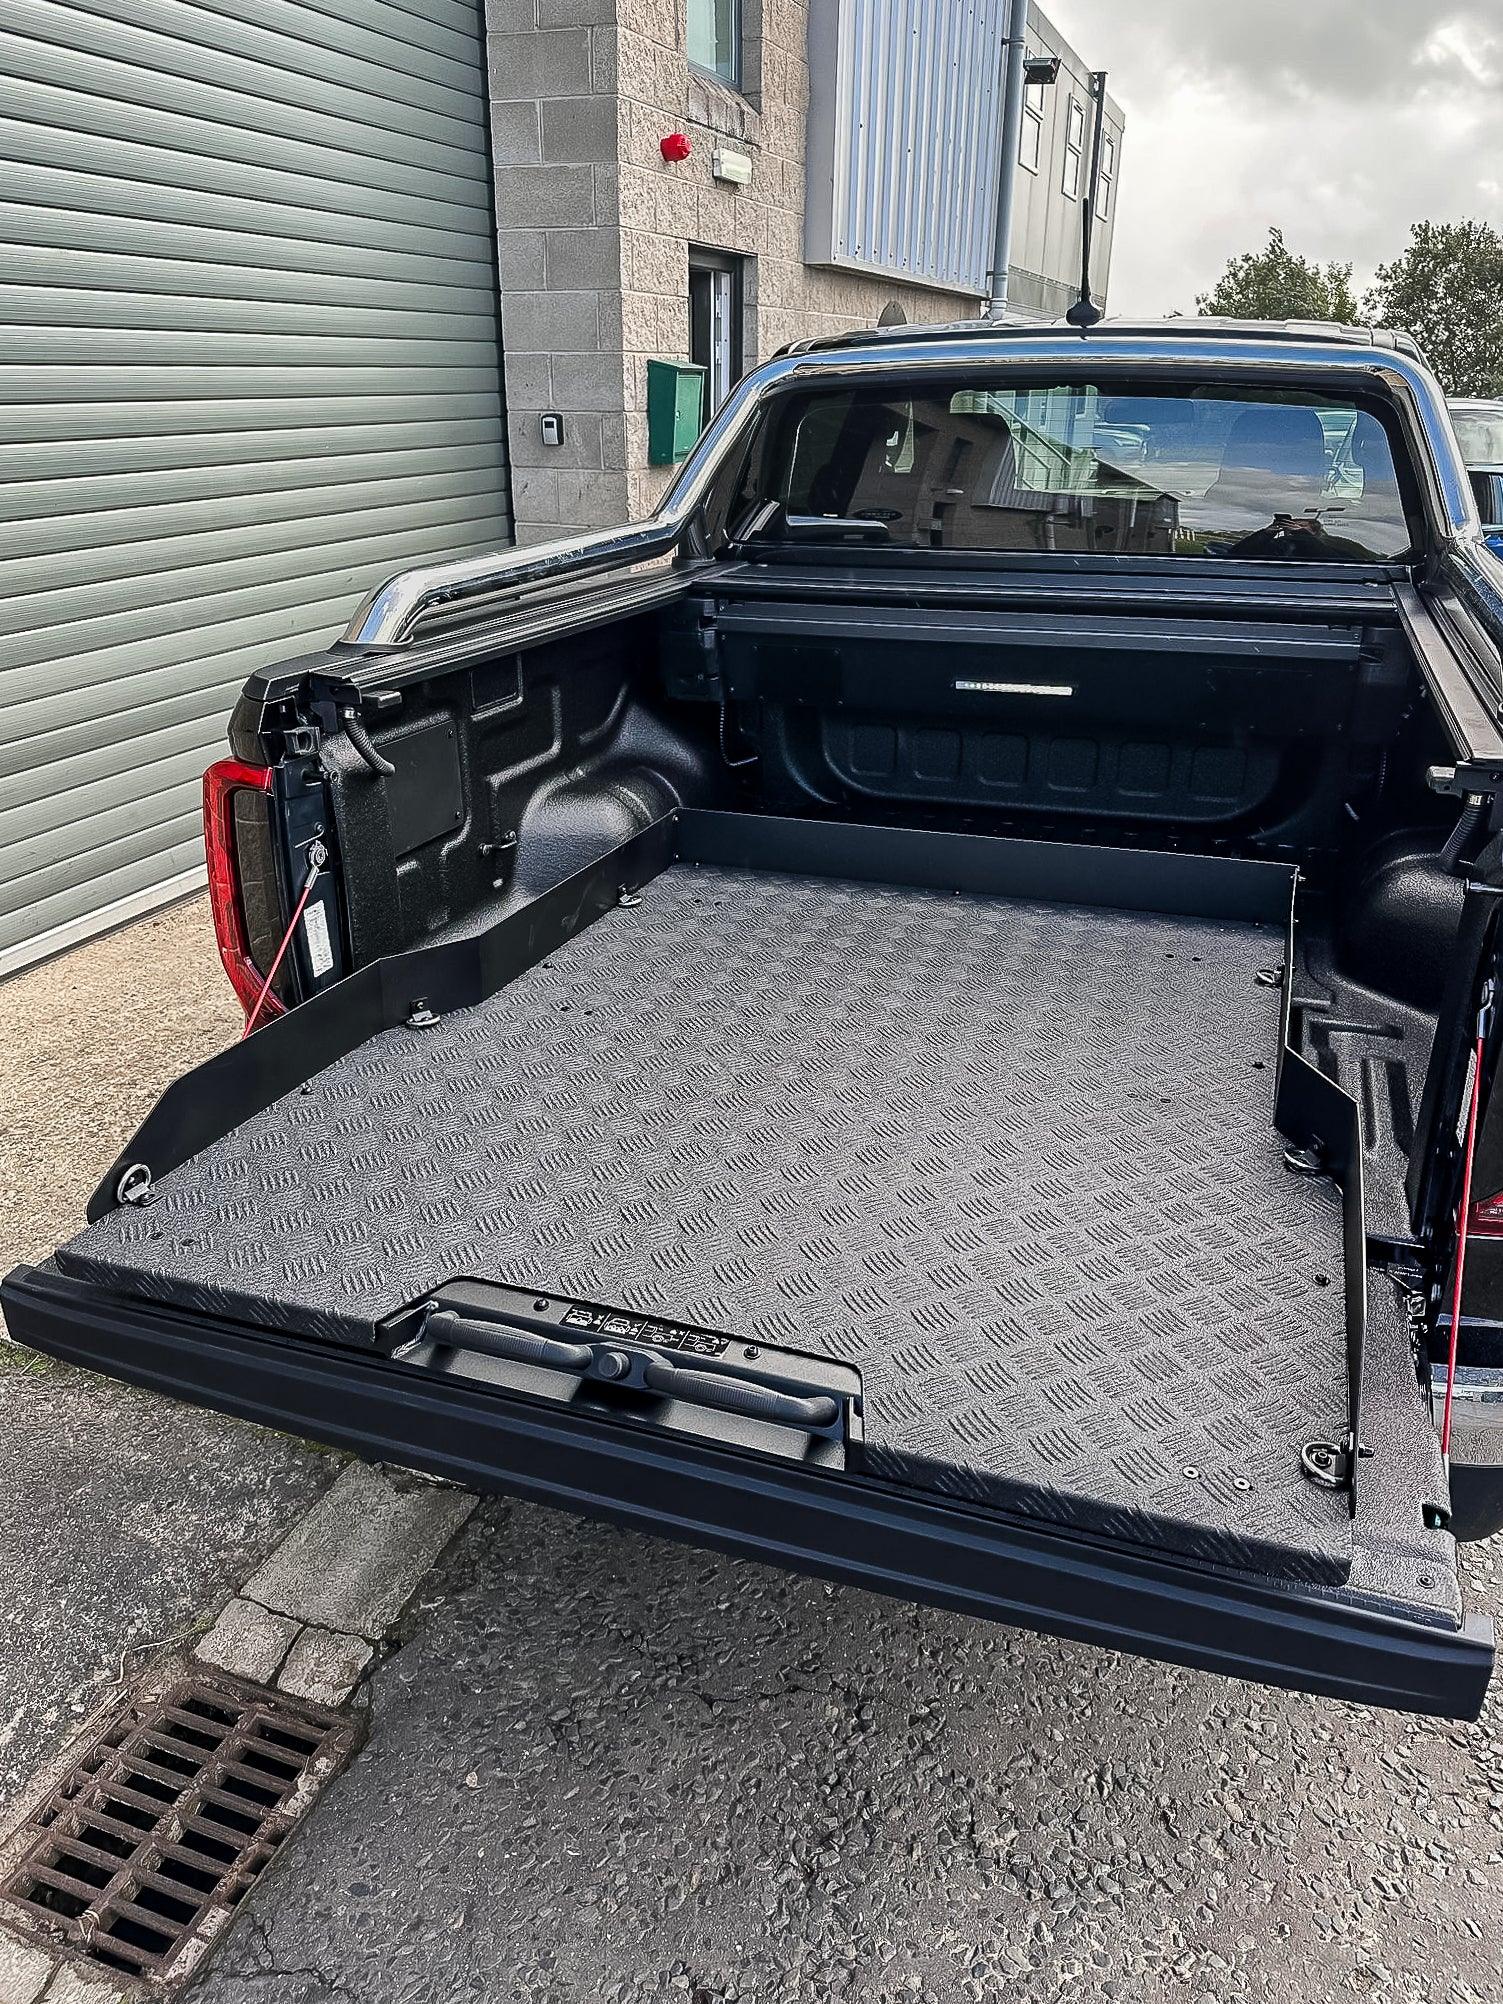 UNIVERSAL HEAVY DUTY LOAD BED METAL SLIDING TRAY FOR DOUBLE CAB PICK UPS - IN BLACK - Storm Xccessories